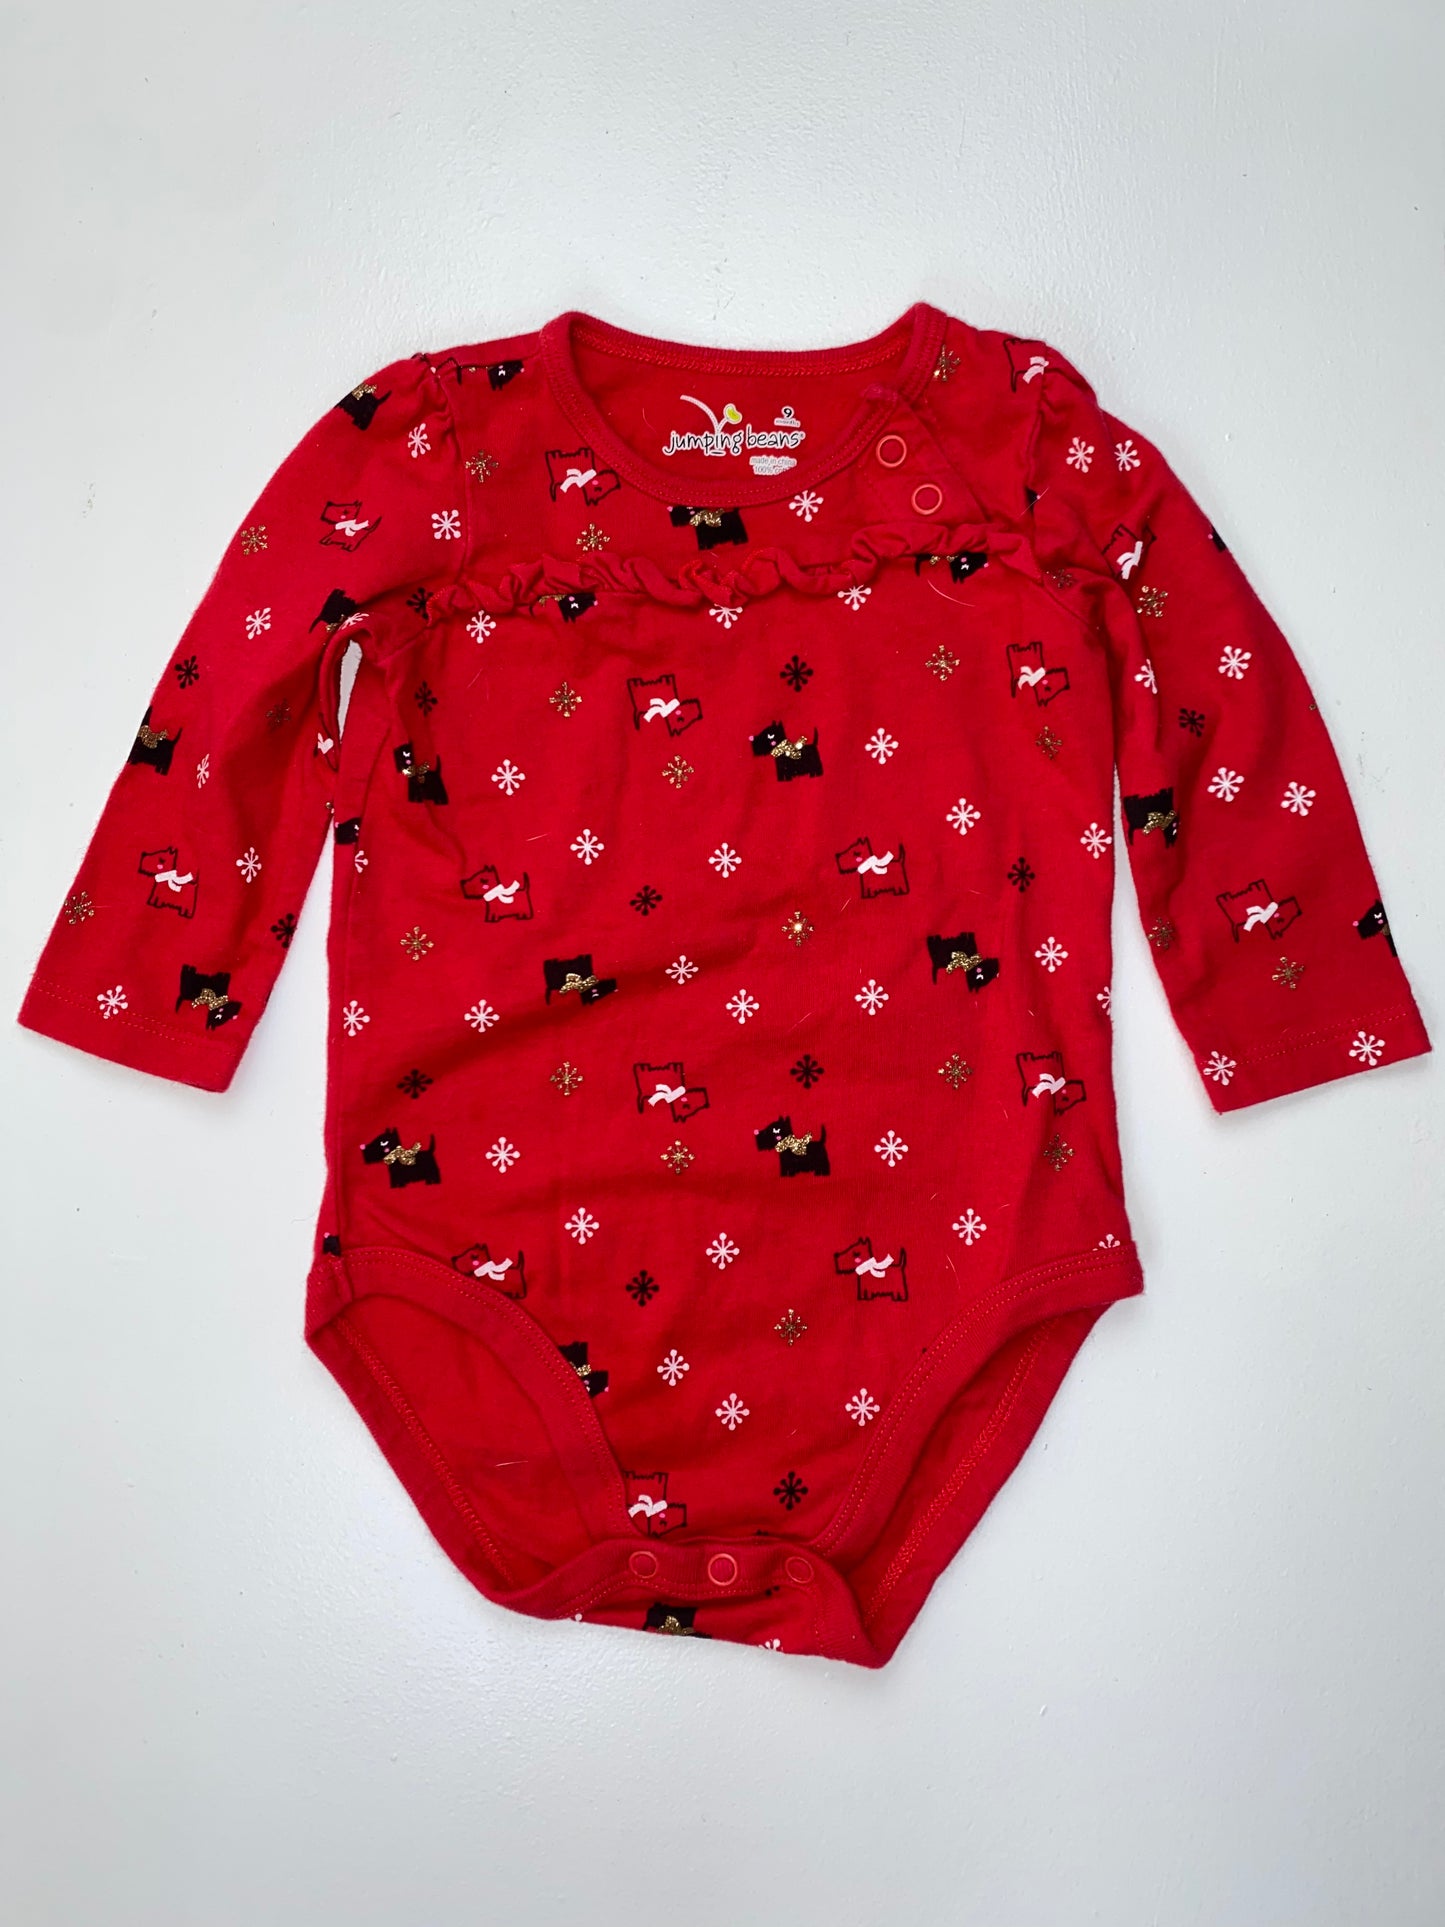 Jumping Beans Red Onesie 9M